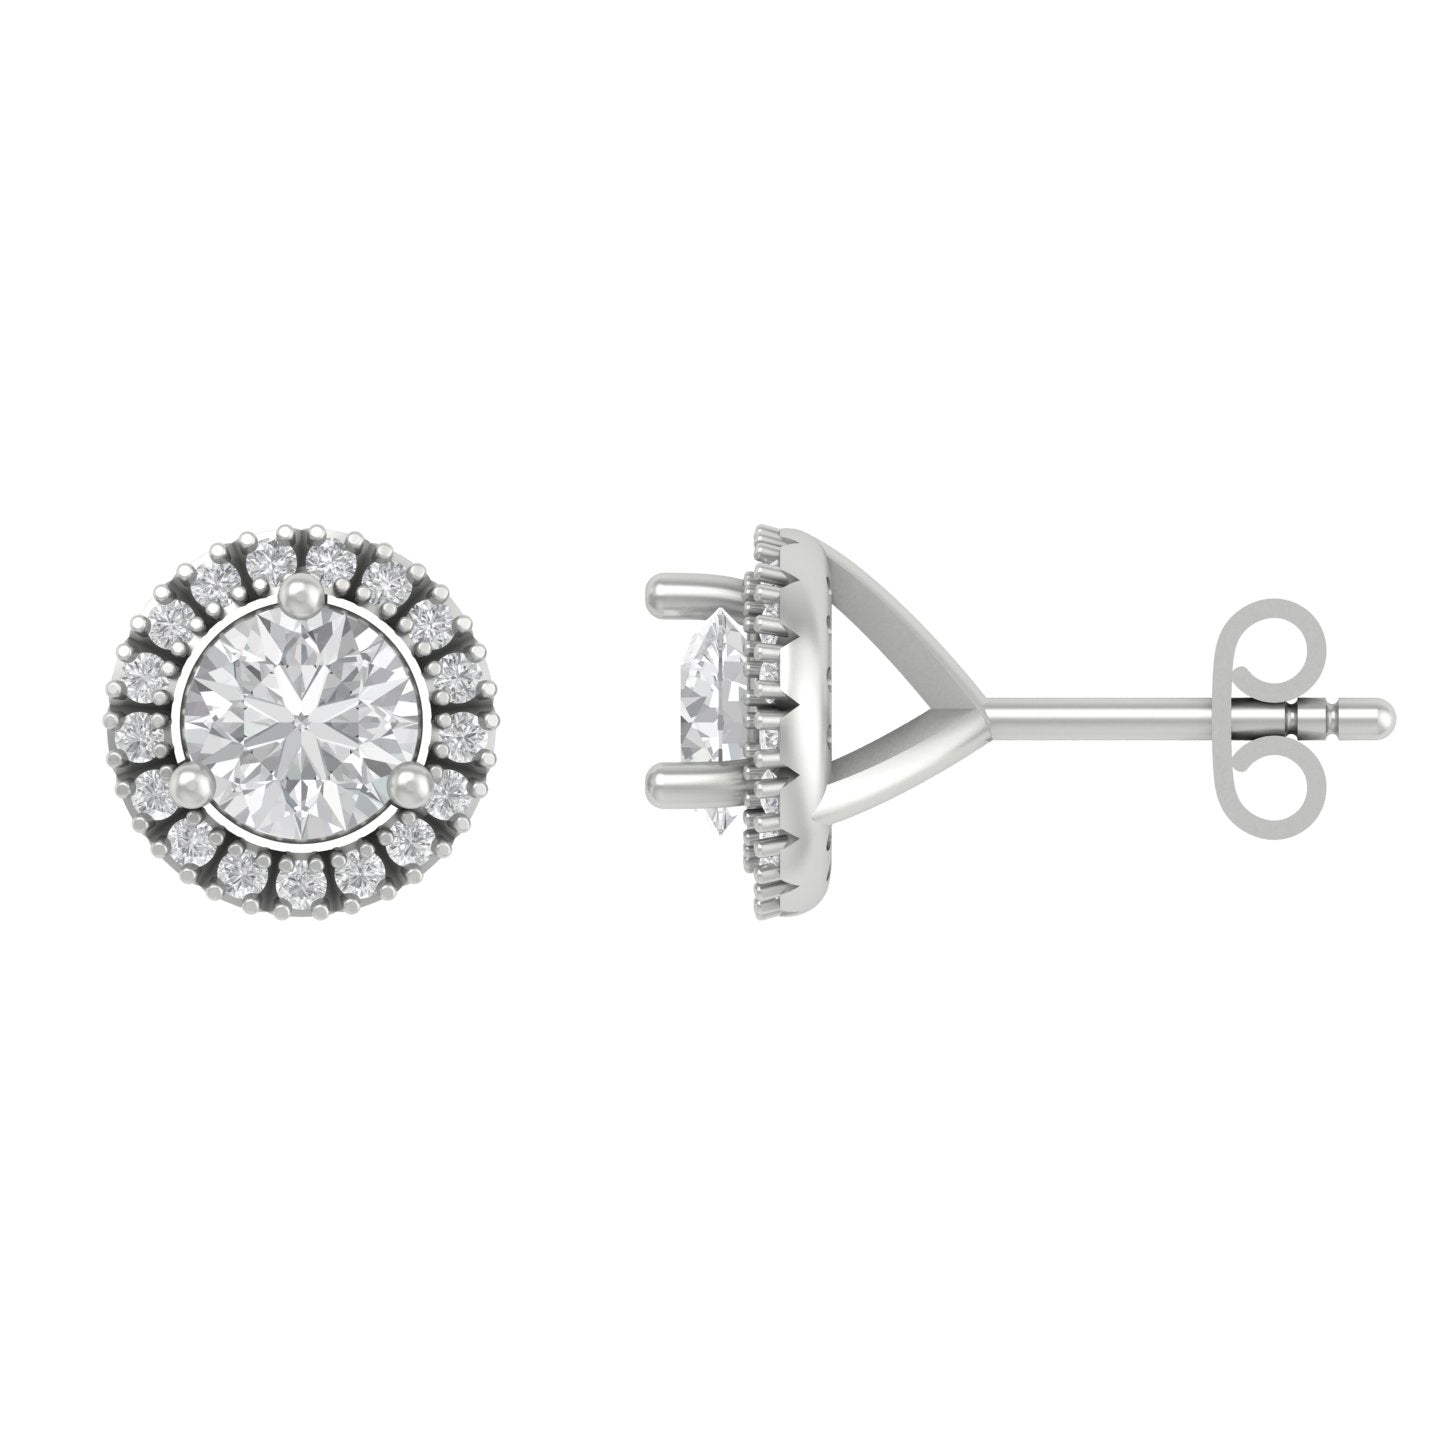 9ct White Gold Diamond Halo Stud Earrings | Angus & Coote